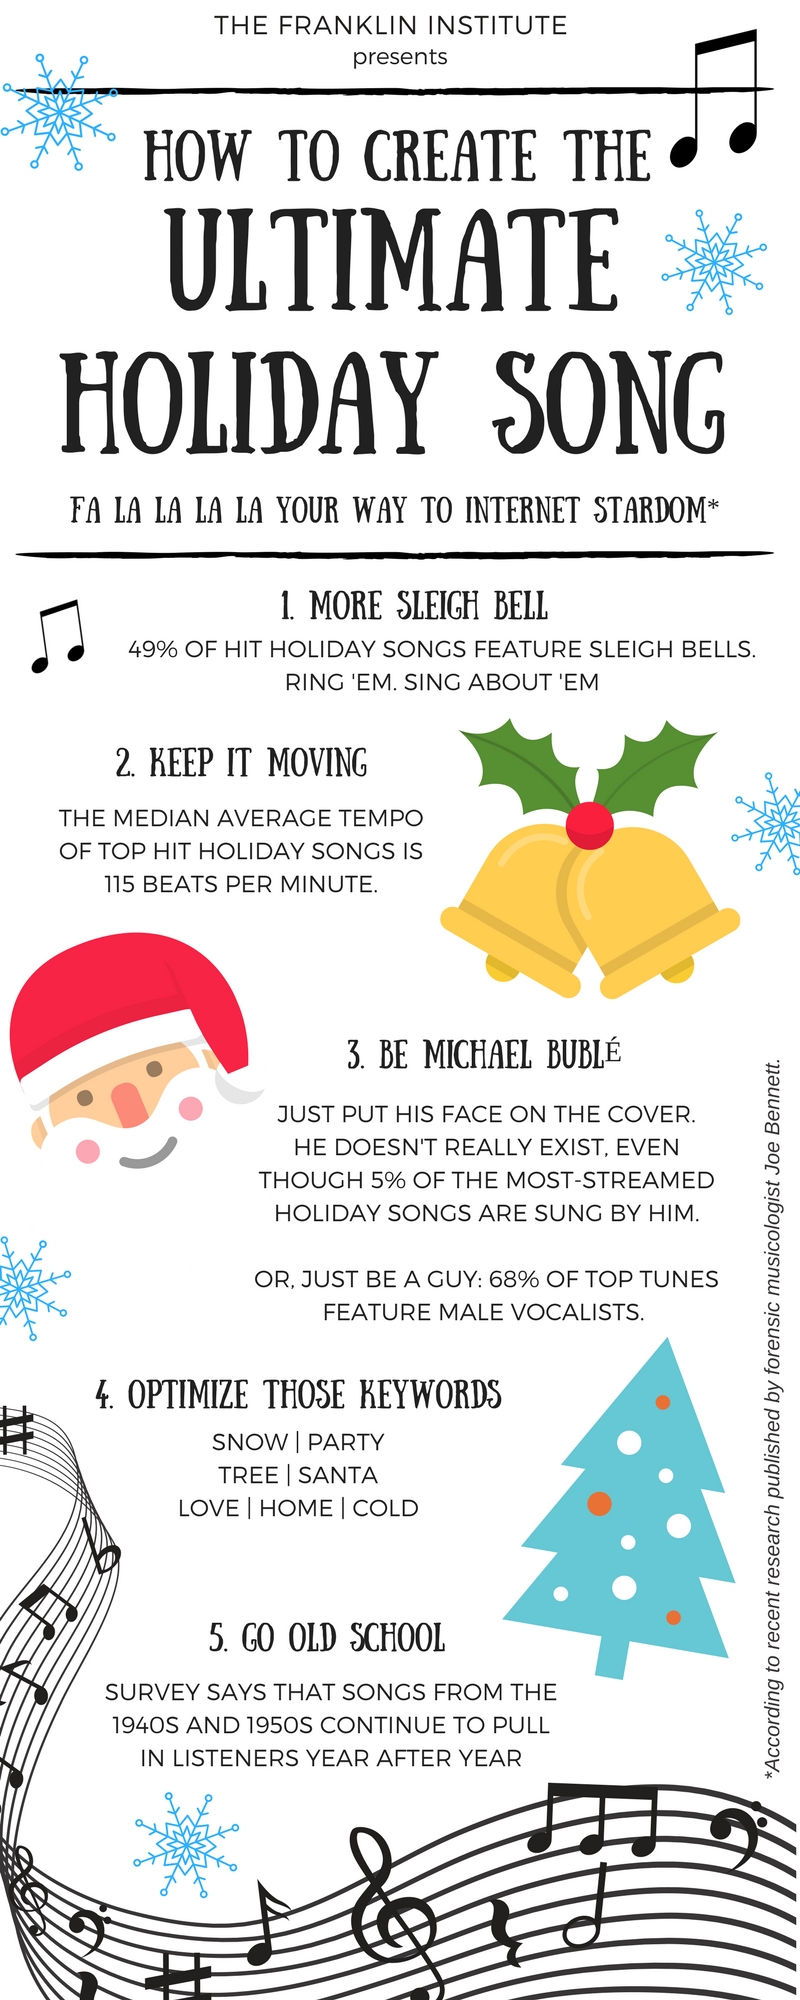 How to Create the Ultimate Holiday Song